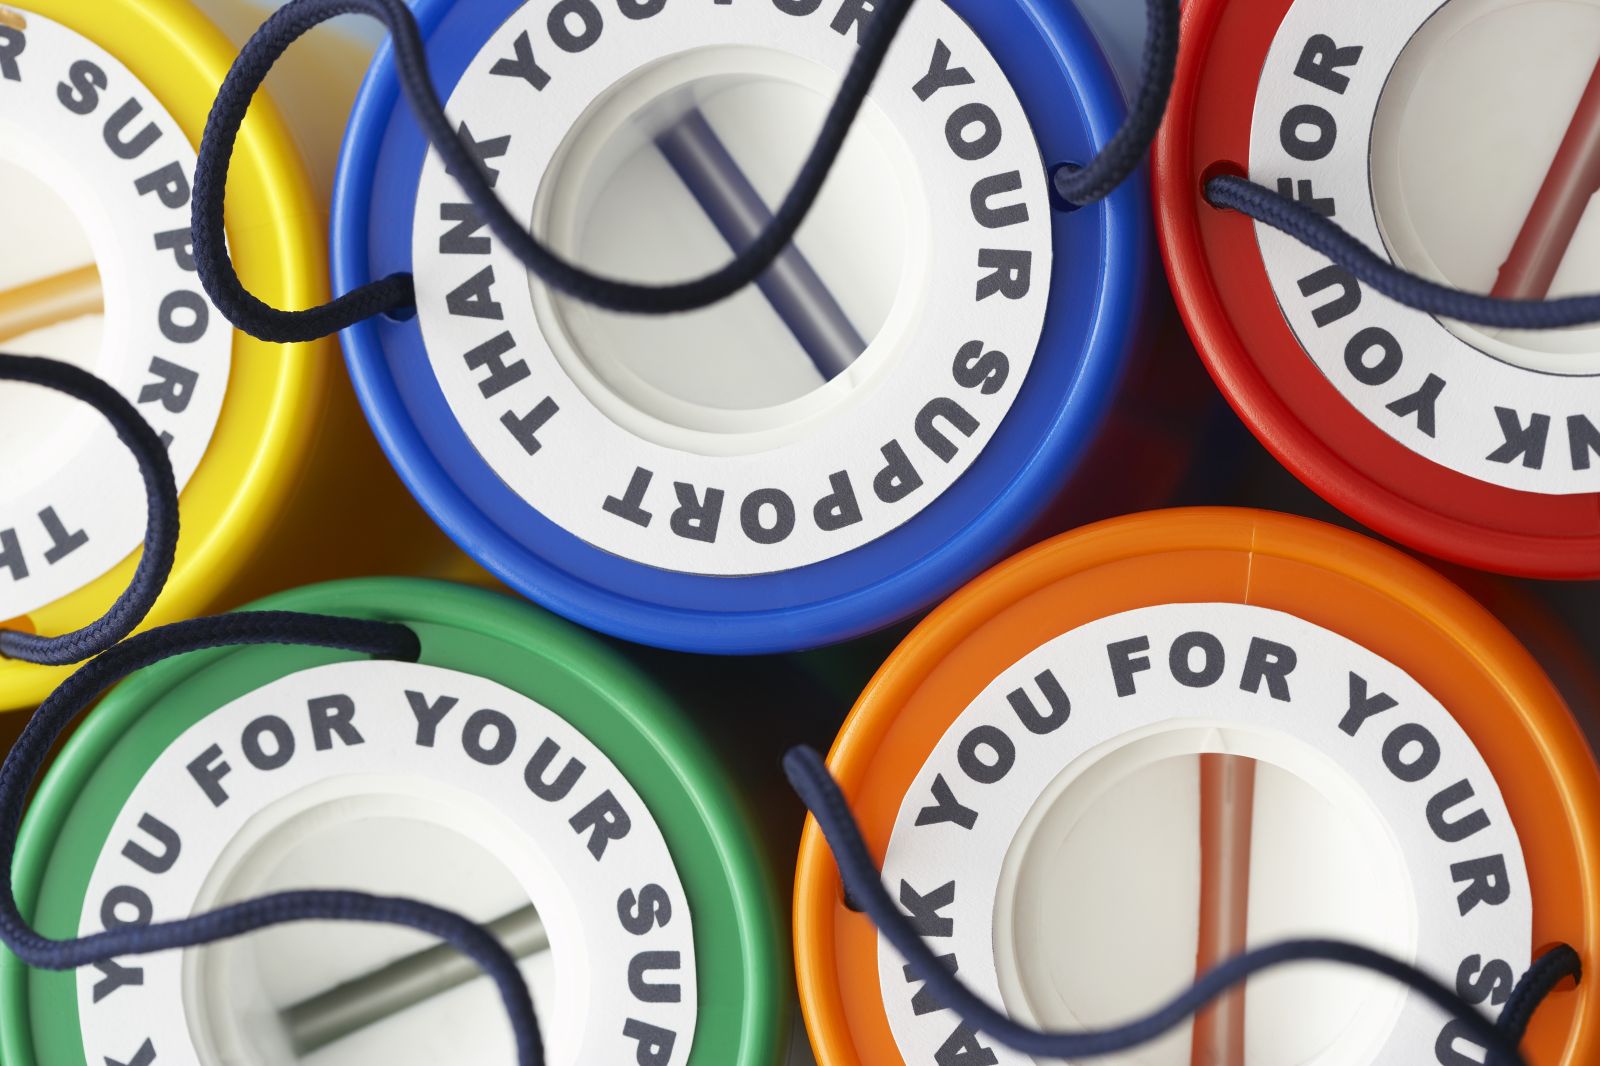 Colourful charity cash collection boxes